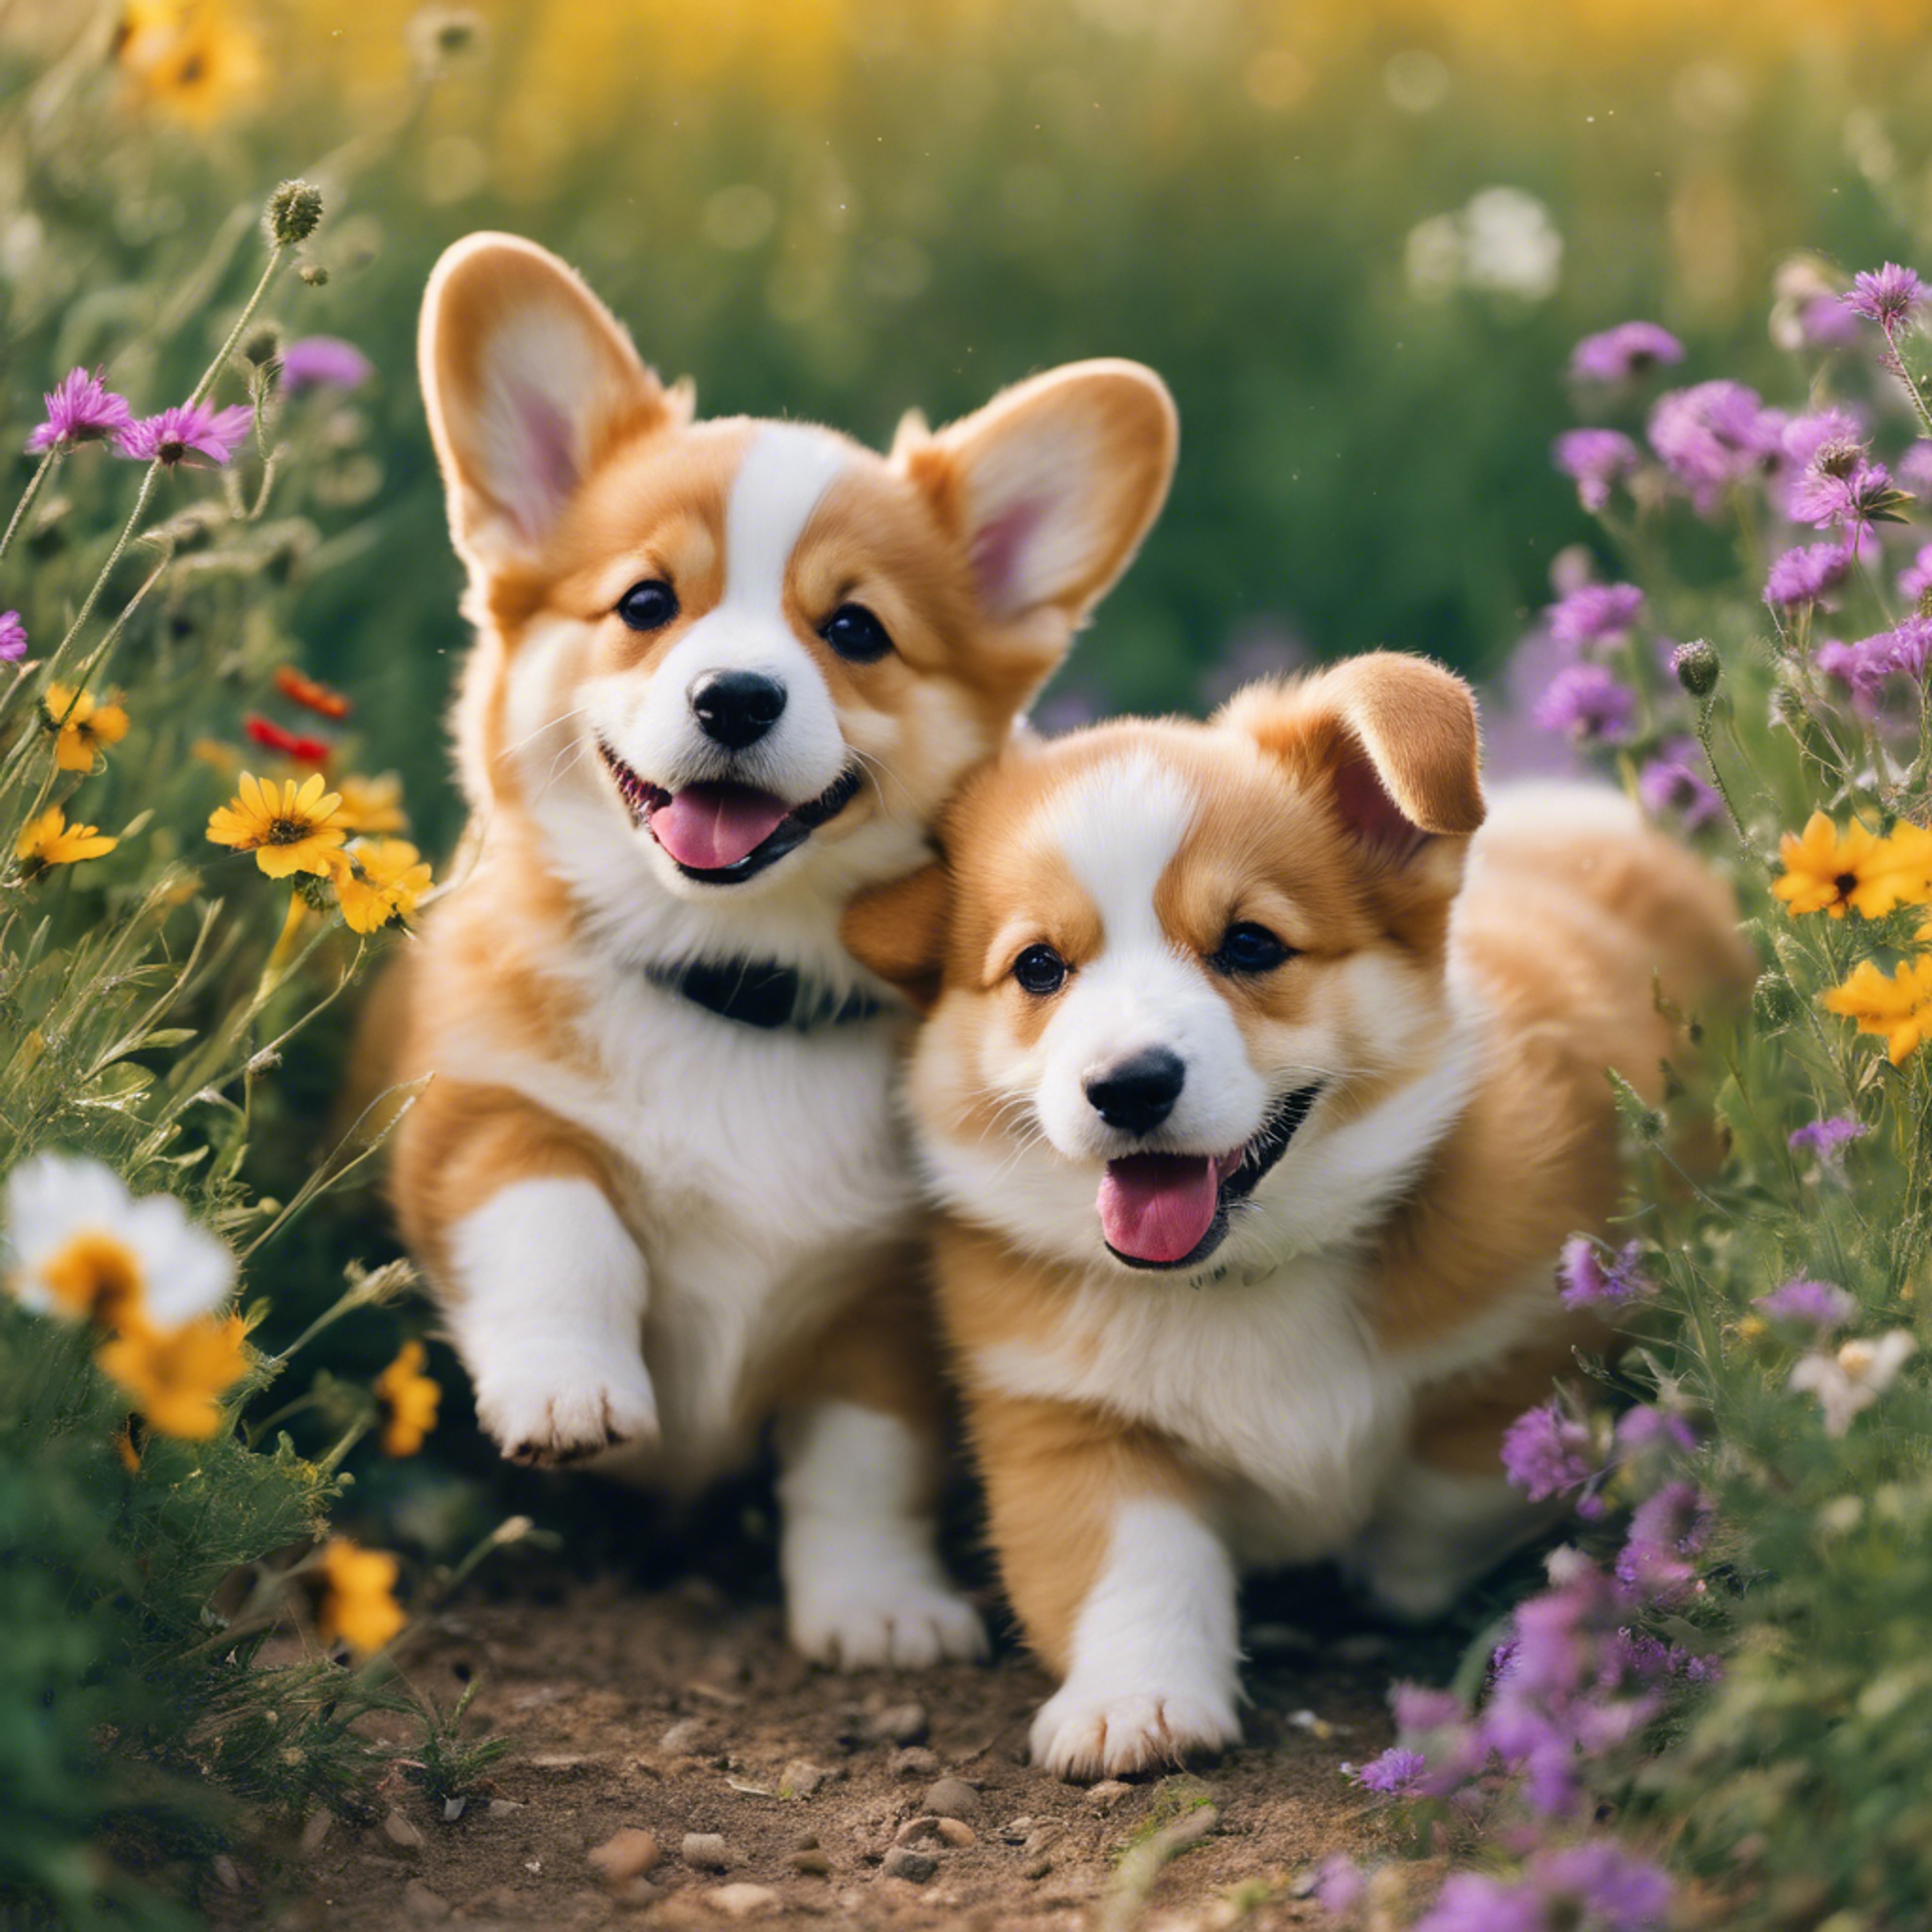 Corgi puppies frolic in a meadow filled with colourful wildflowers. วอลล์เปเปอร์[ff39099a16654d489ef7]